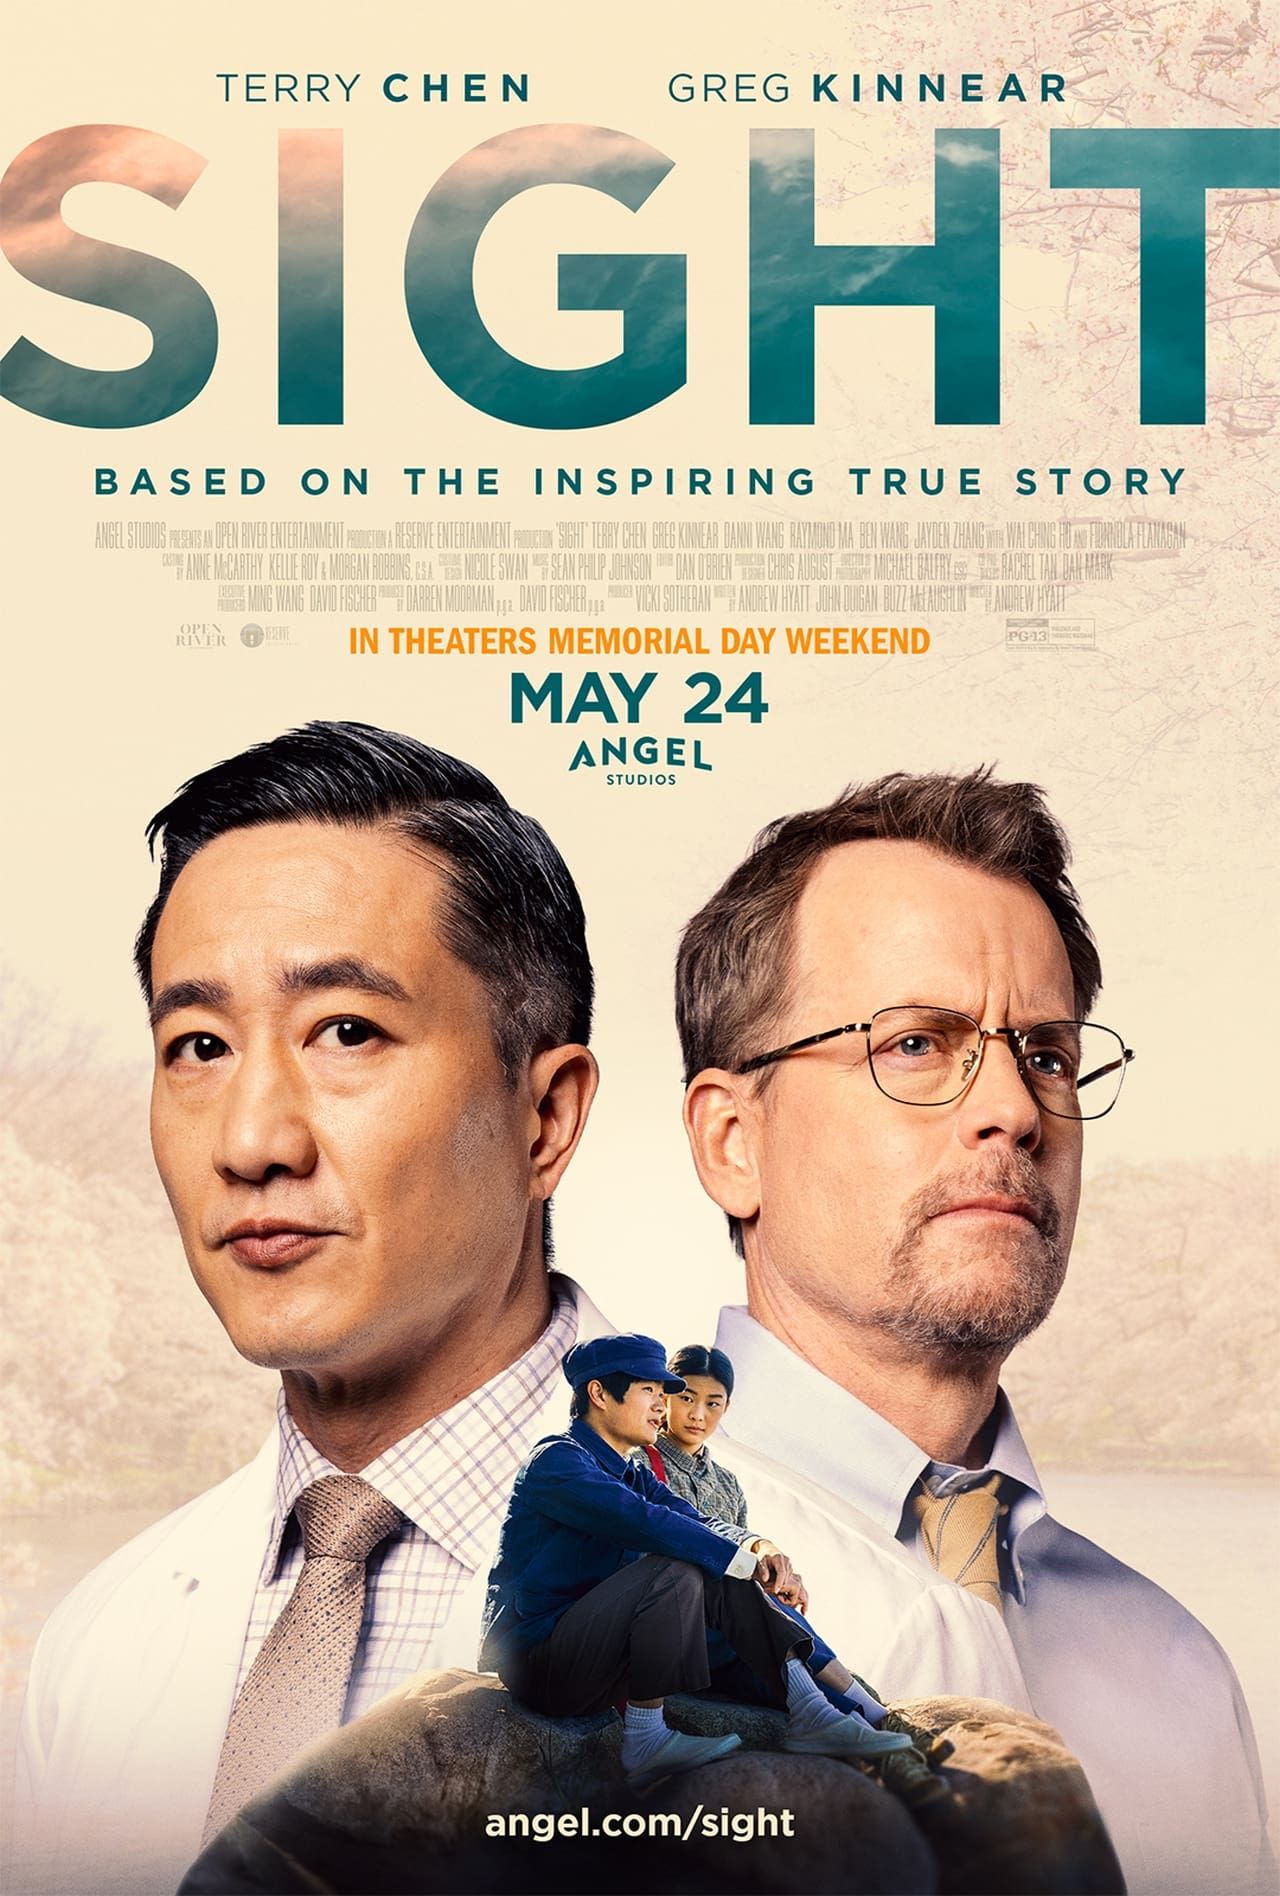 Sight movie poster showing Terry Chen and Greg Kinnear